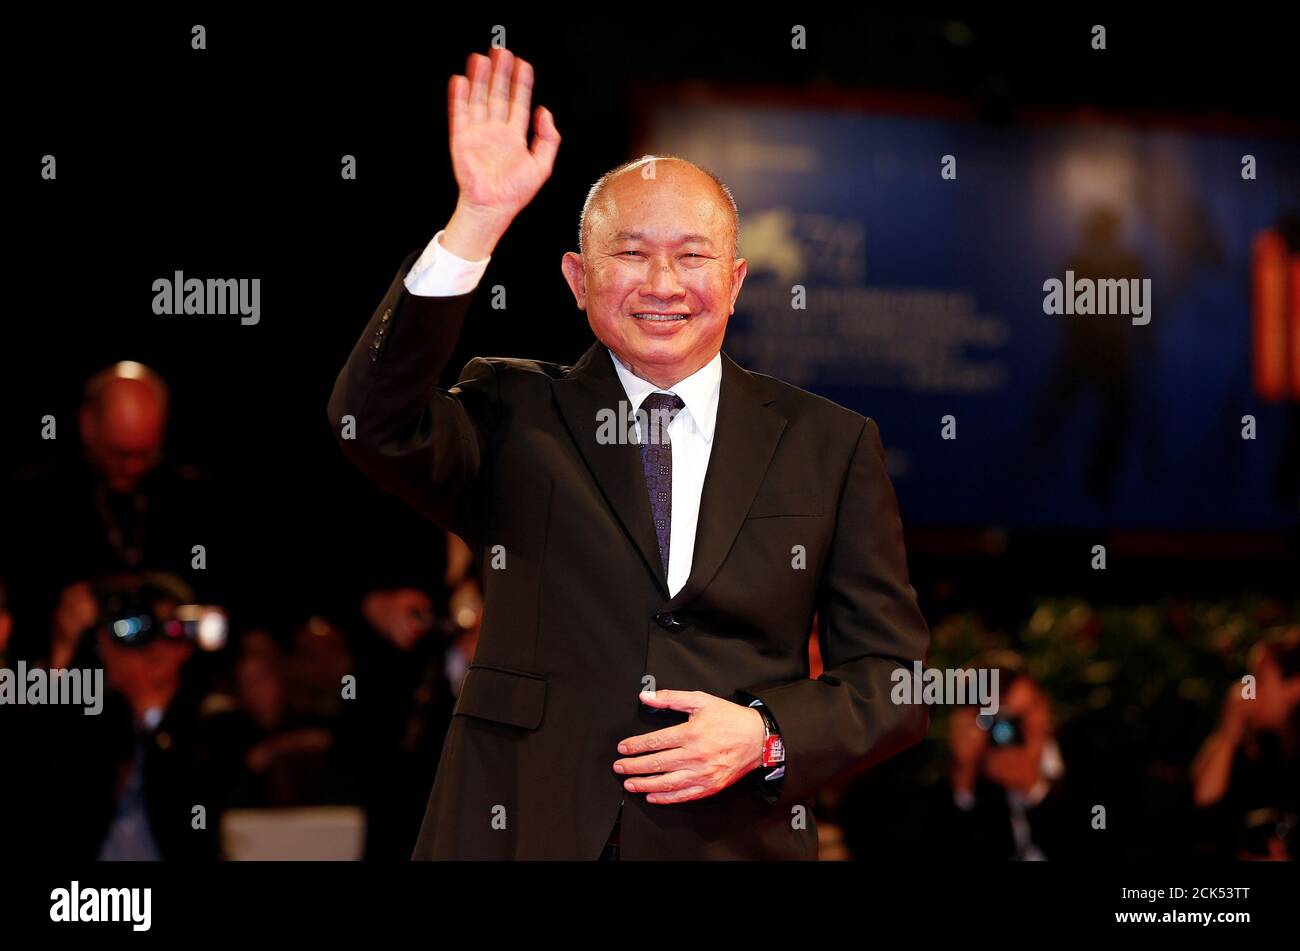 REFILE - CORRECTING TYPO IN FILM NAME:  Director John Woo waves as he arrives during a red carpet event for the movie 'Zhuibu (Manhunt)' at the 74th Venice Film Festival in Venice, Italy, September 8, 2017. REUTERS/Alessandro Bianchi Stock Photo